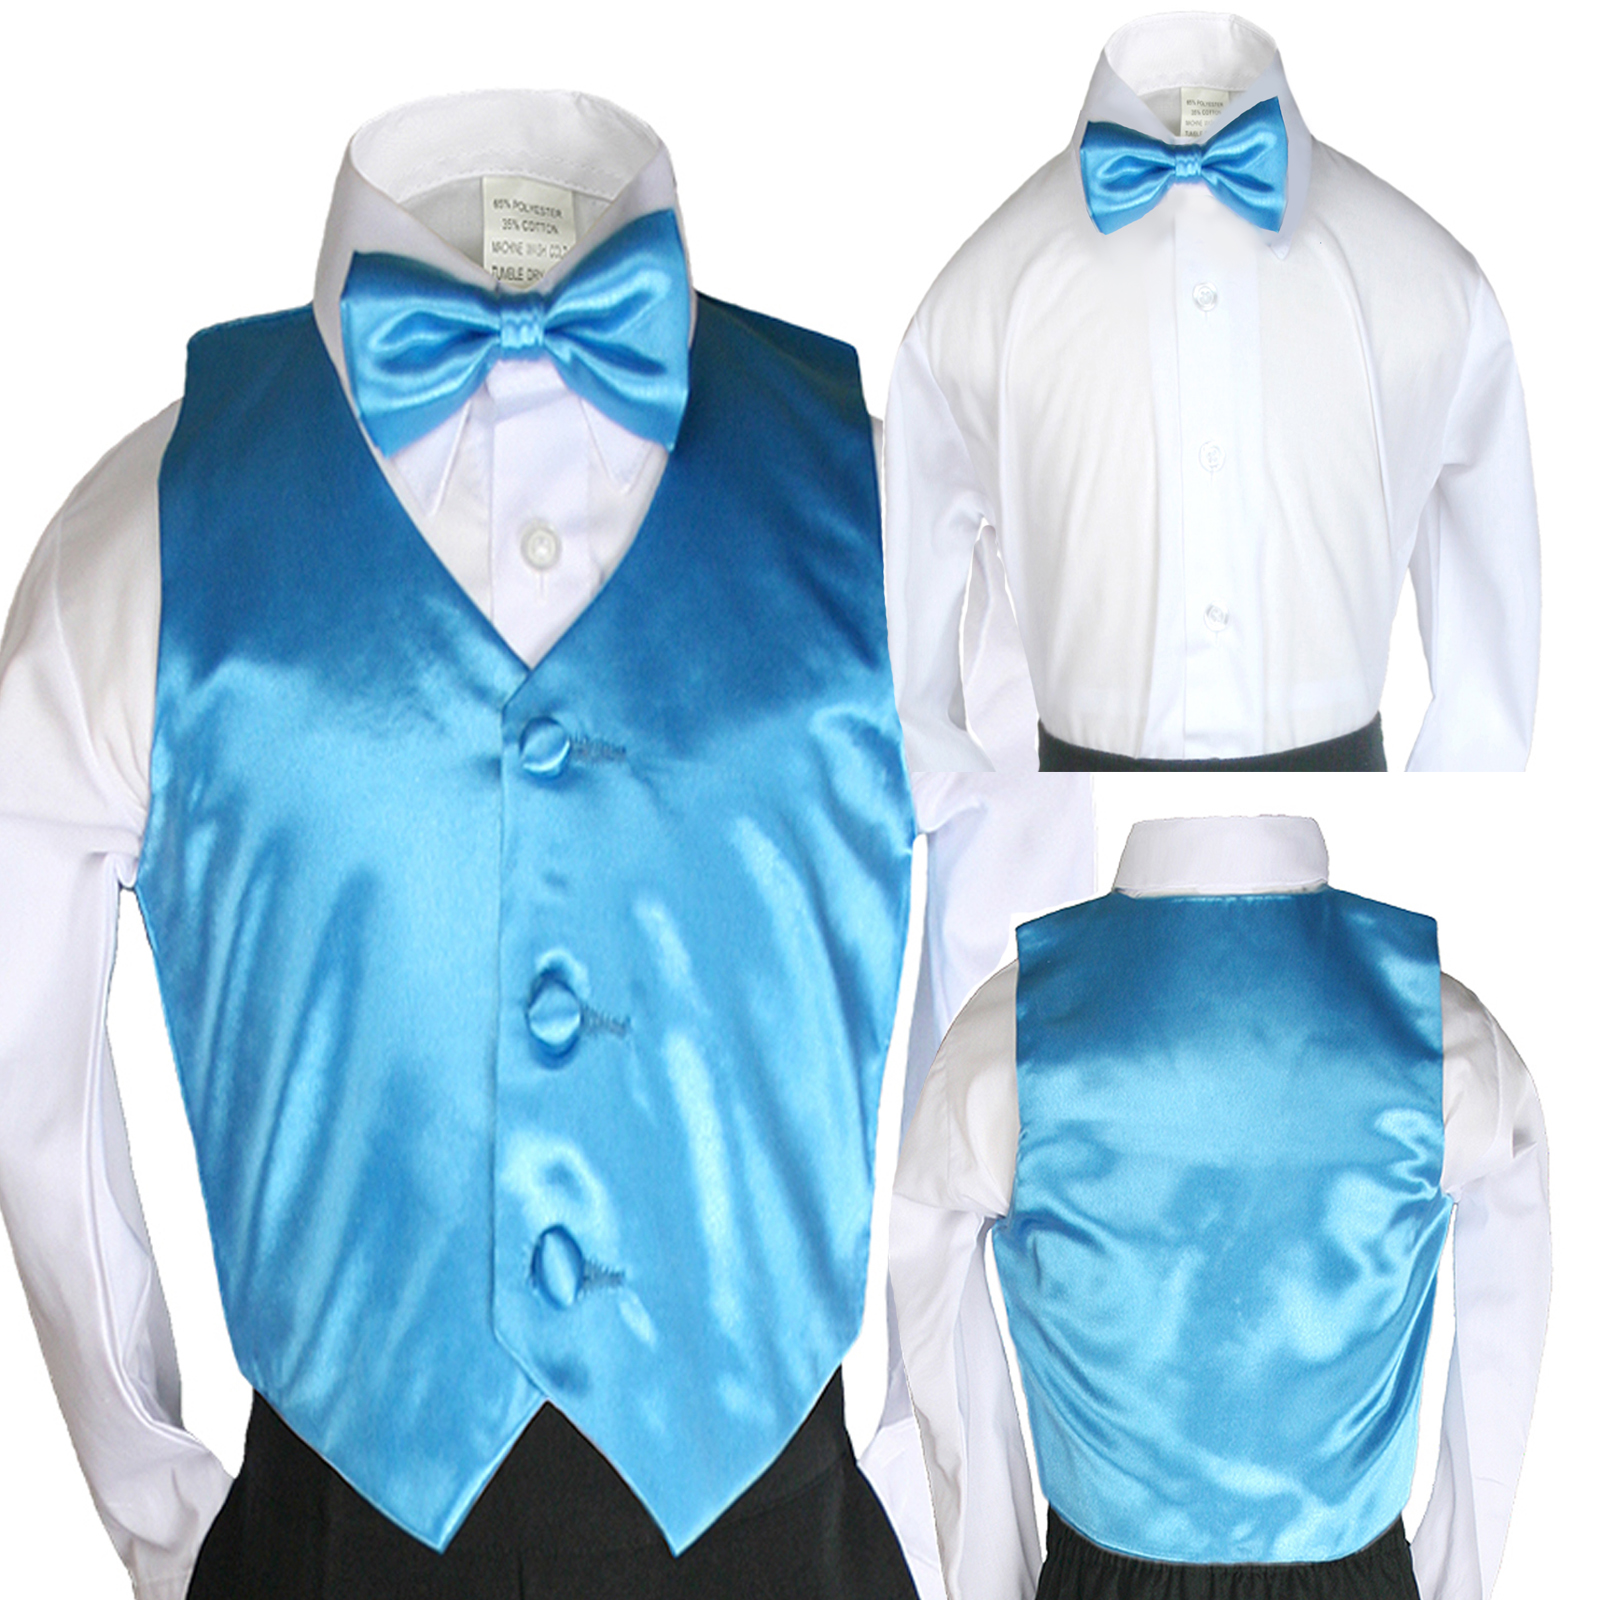 Leadertux 5 6 7 8 10 12 14 16 18 20 Turquoise Vest + Bow Tie set for Boy Kid Child size matching for Formal Tuxedo Suit